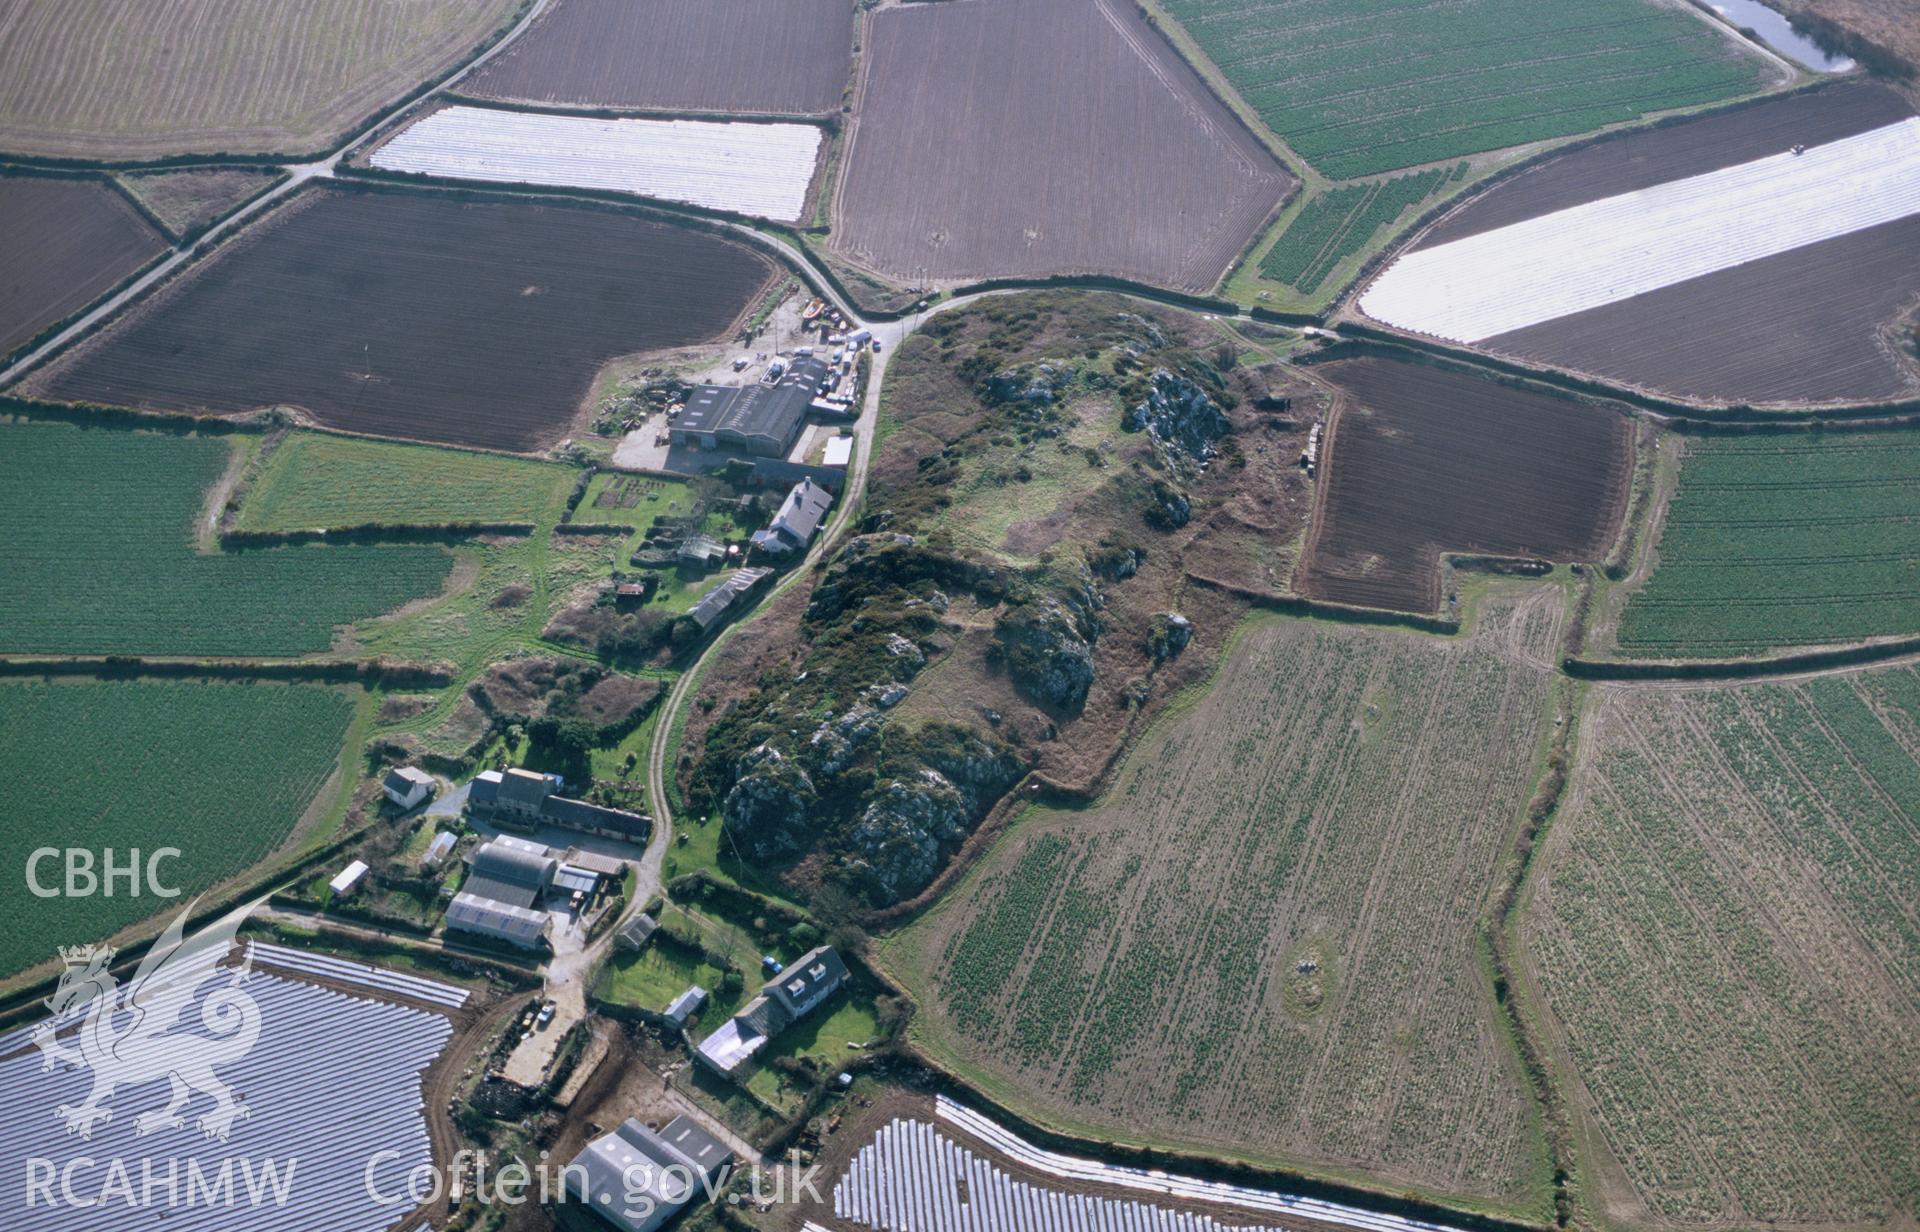 Slide of RCAHMW colour oblique aerial photograph of Clegyr Boia, taken by Toby Driver, 2002.